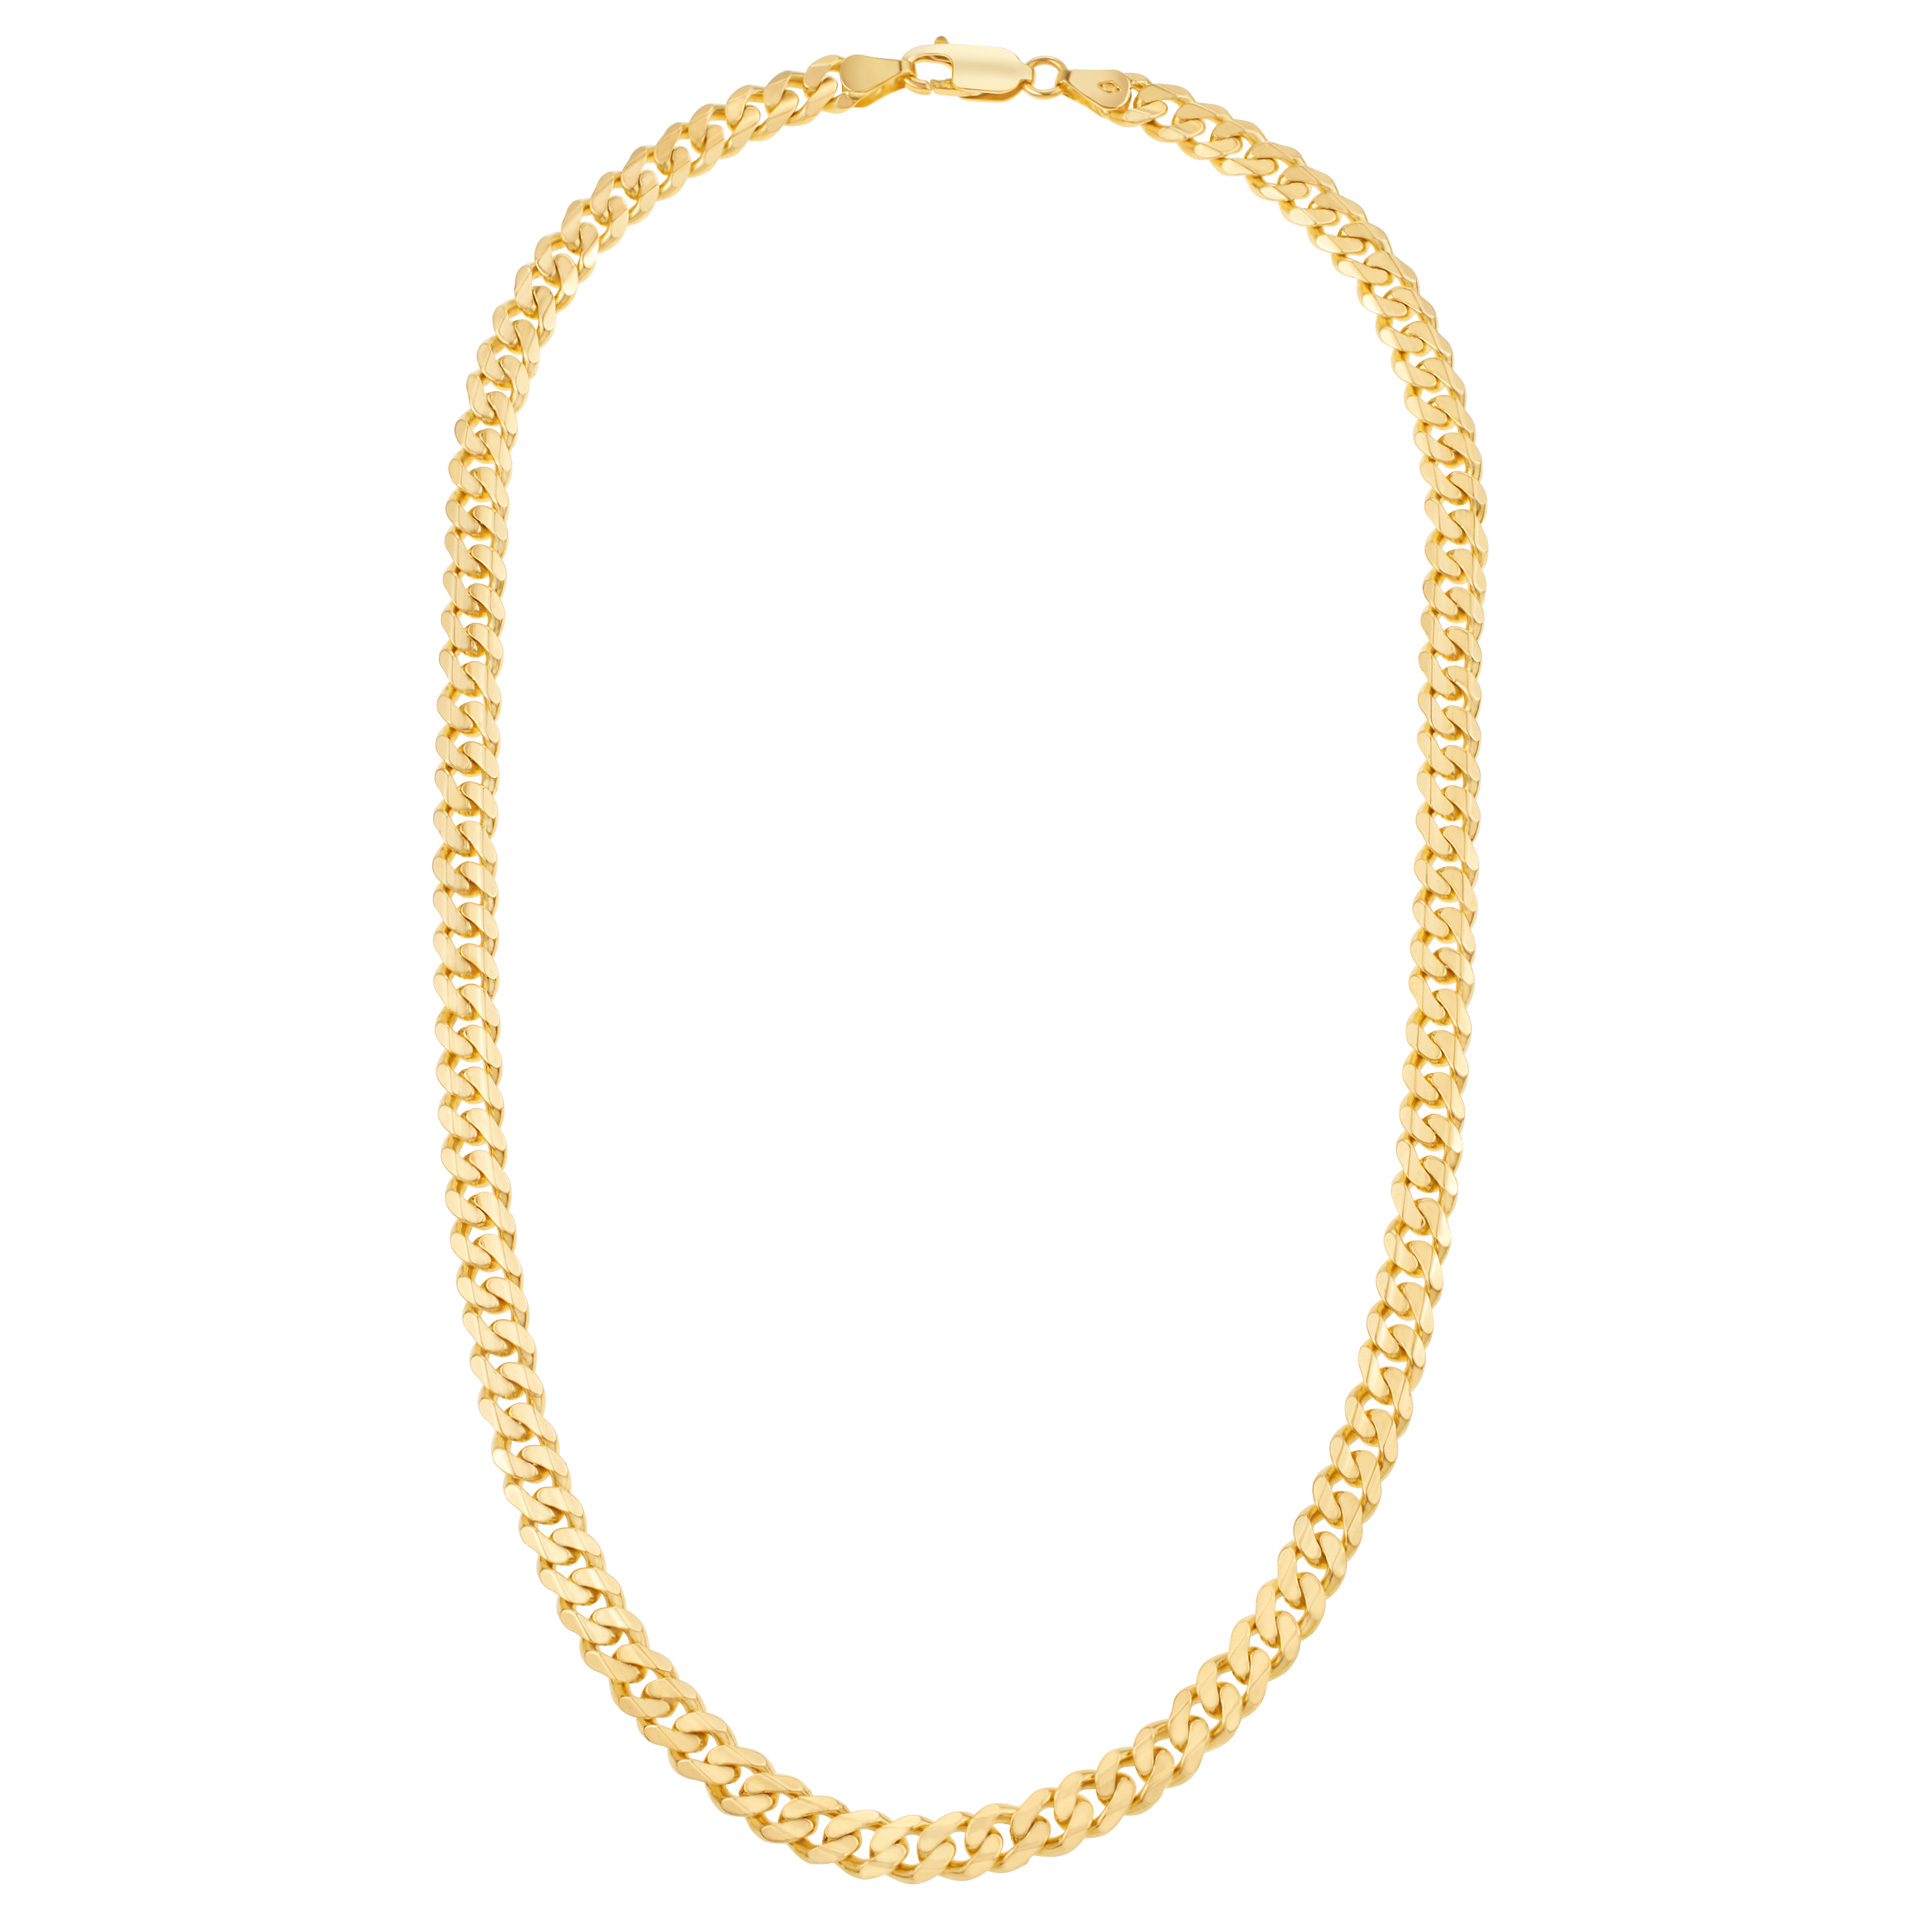 Necklace in 14k yellow gold image 1